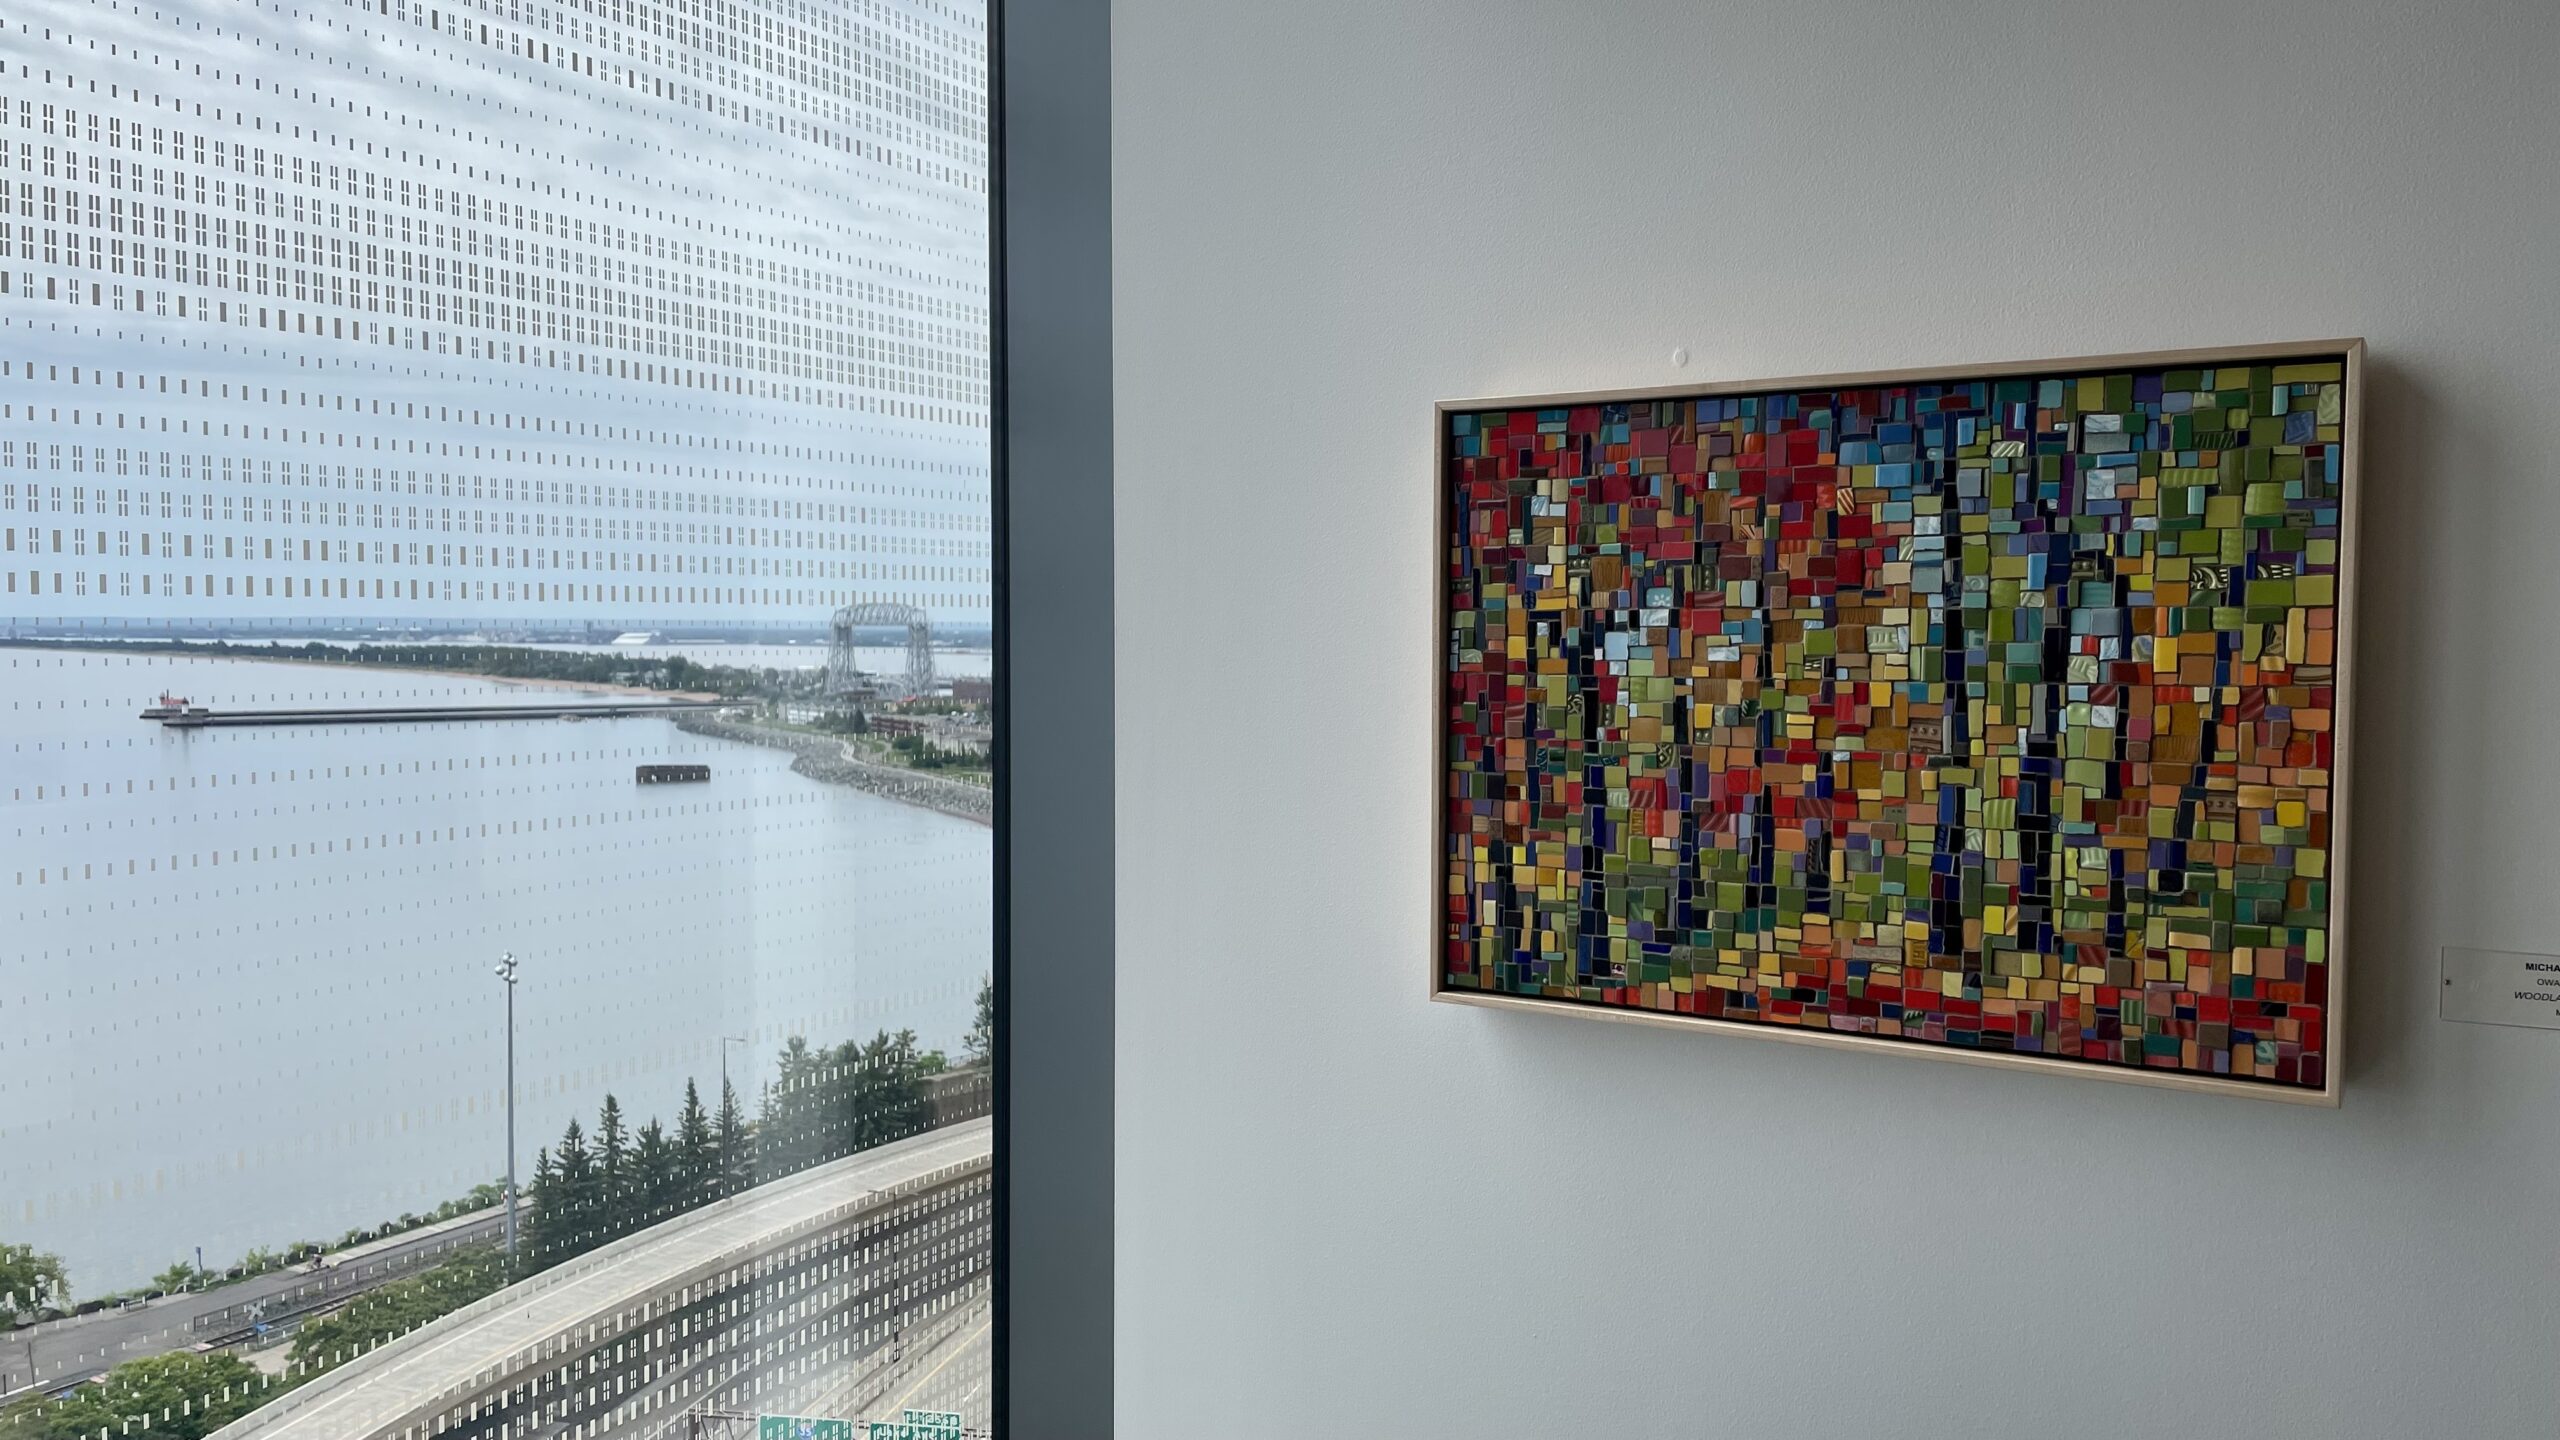 Art fills a corner of a wall near a window with a view of the Lift Bridge.